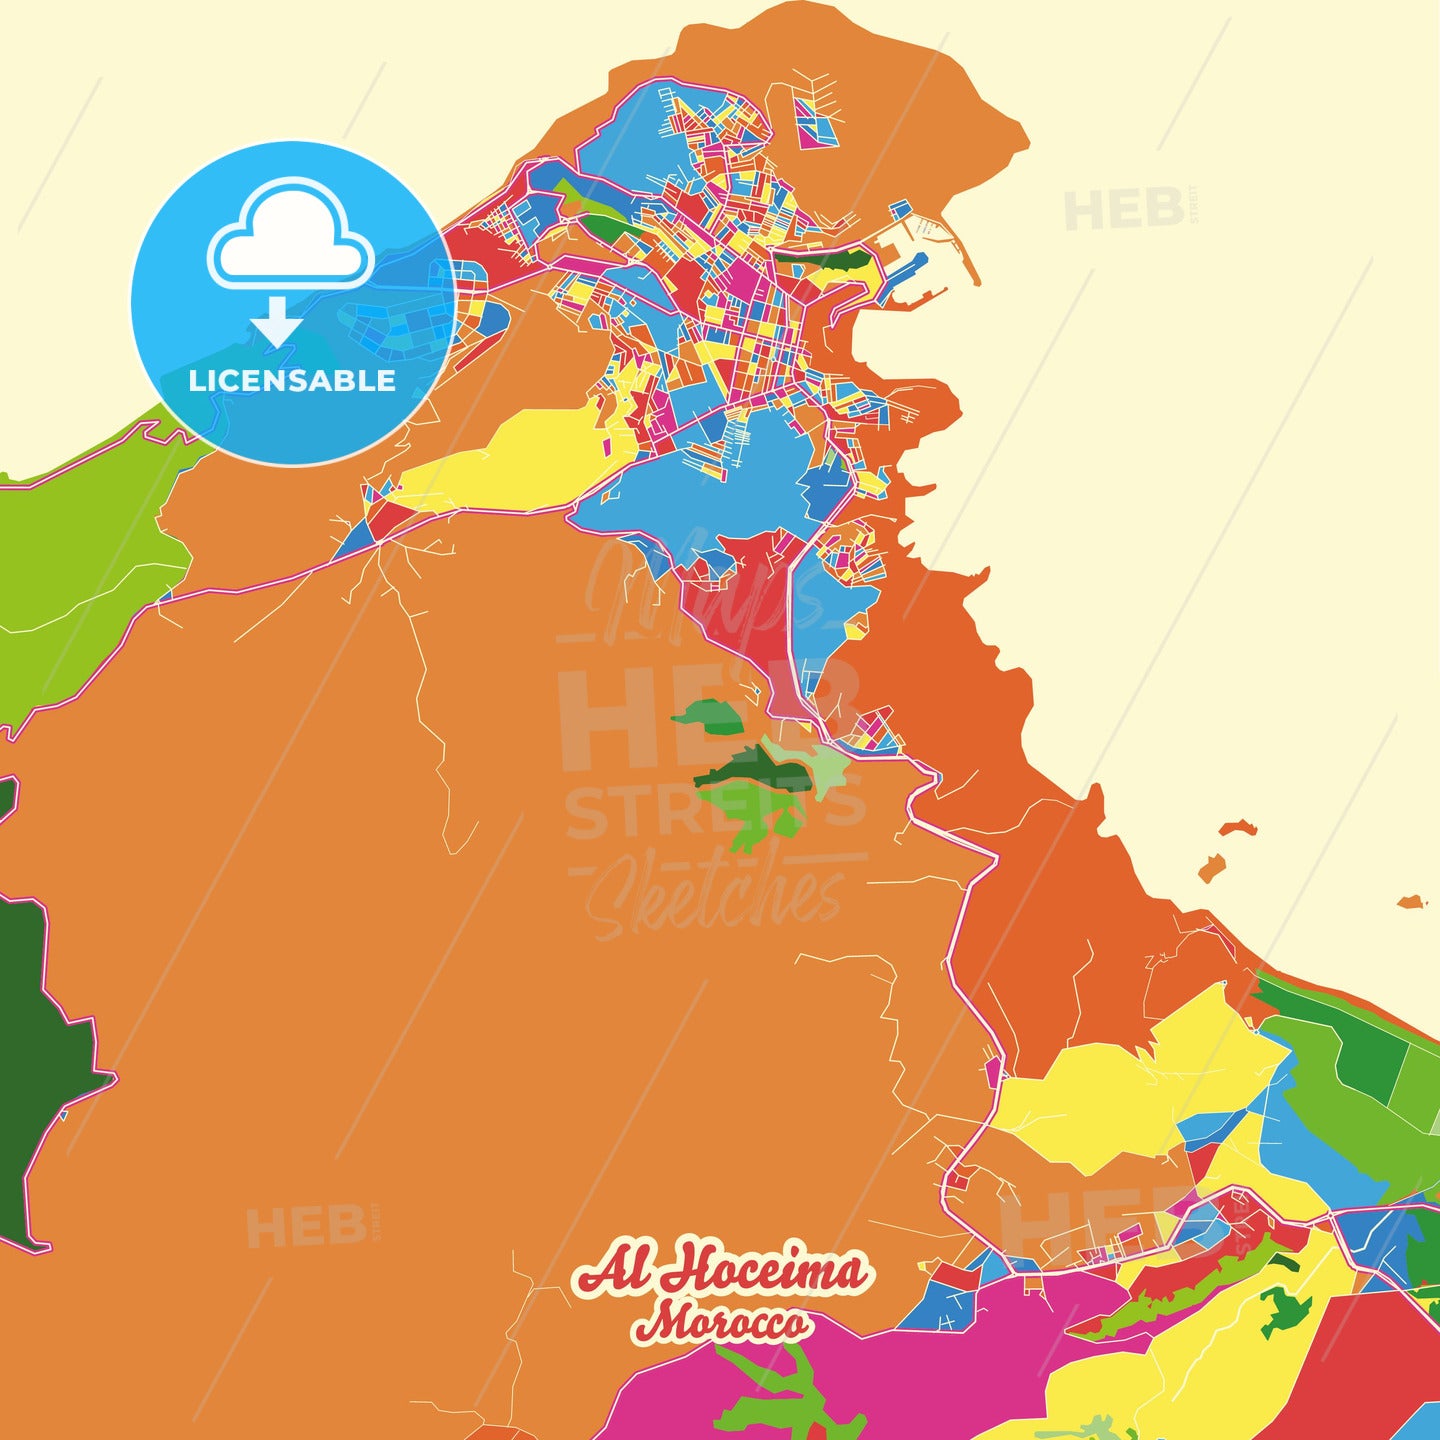 Al Hoceima, Morocco Crazy Colorful Street Map Poster Template - HEBSTREITS Sketches